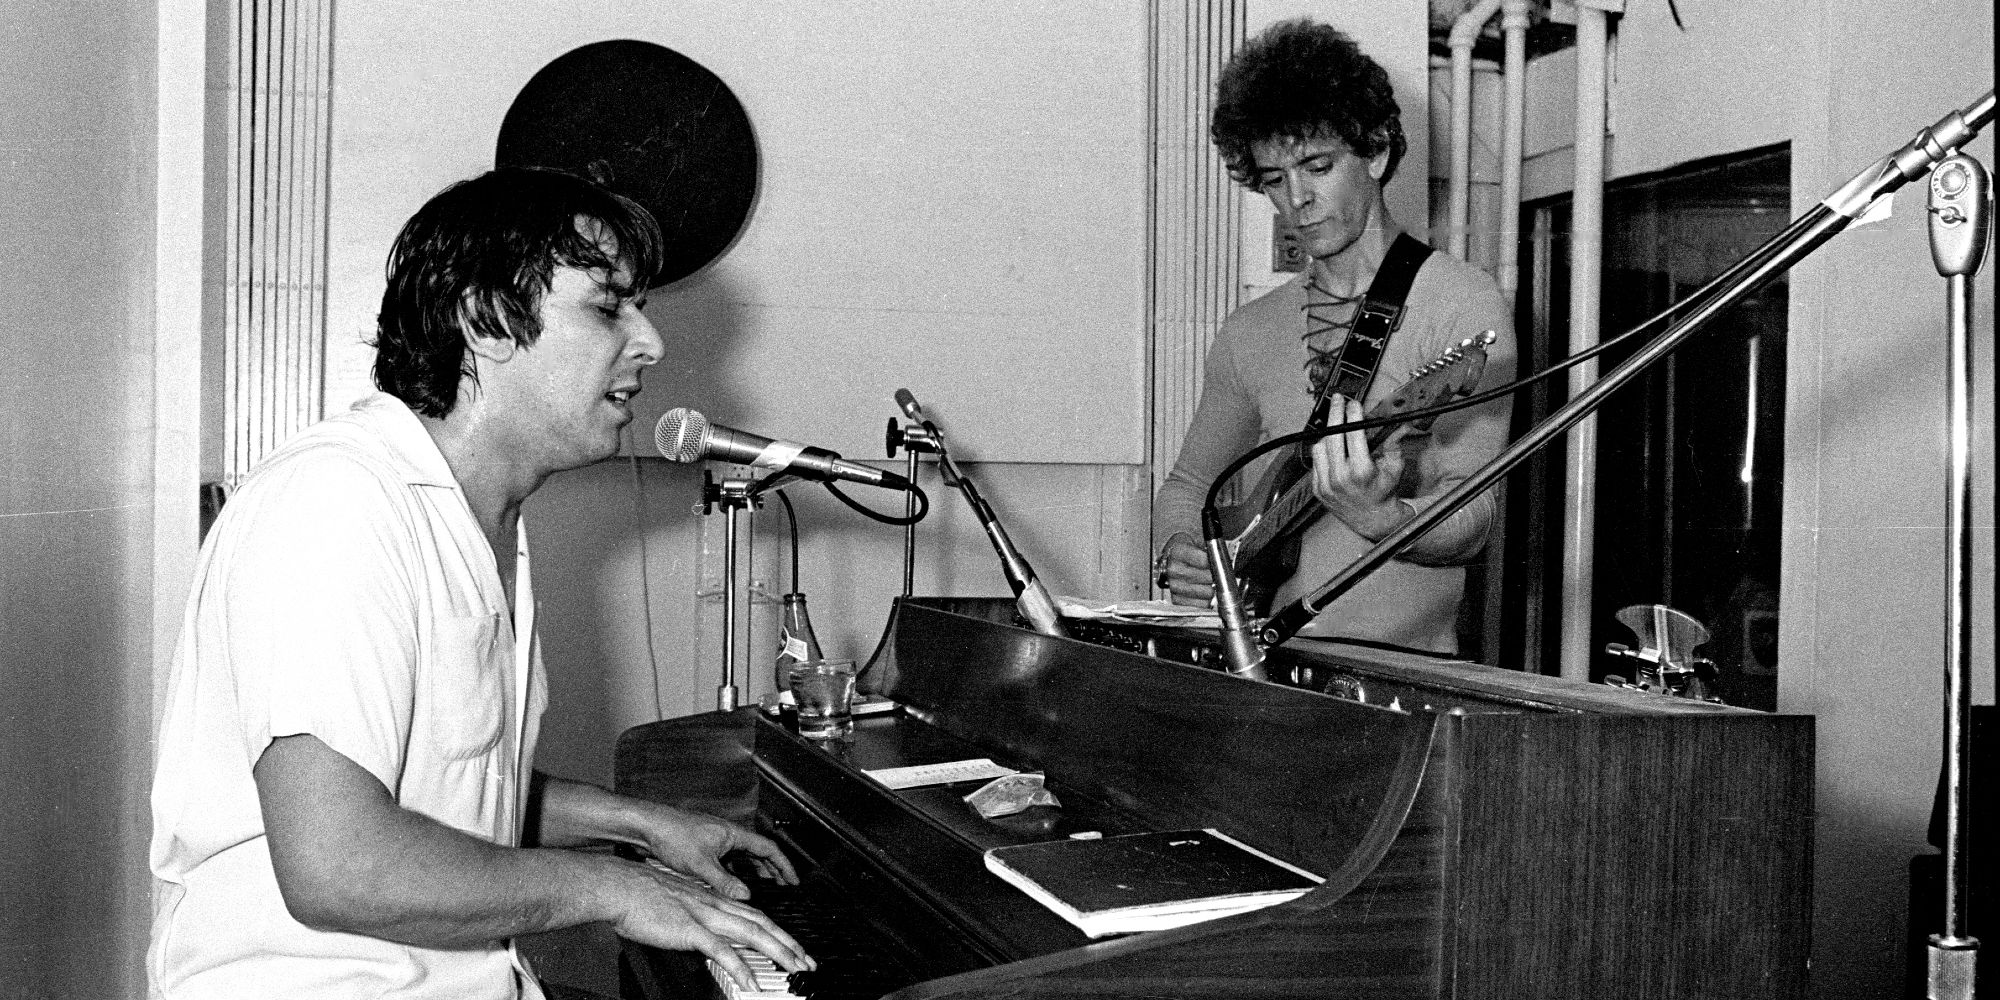 Frenemies John Cale and Lou Reed play music together in the studio during the late 1960s.